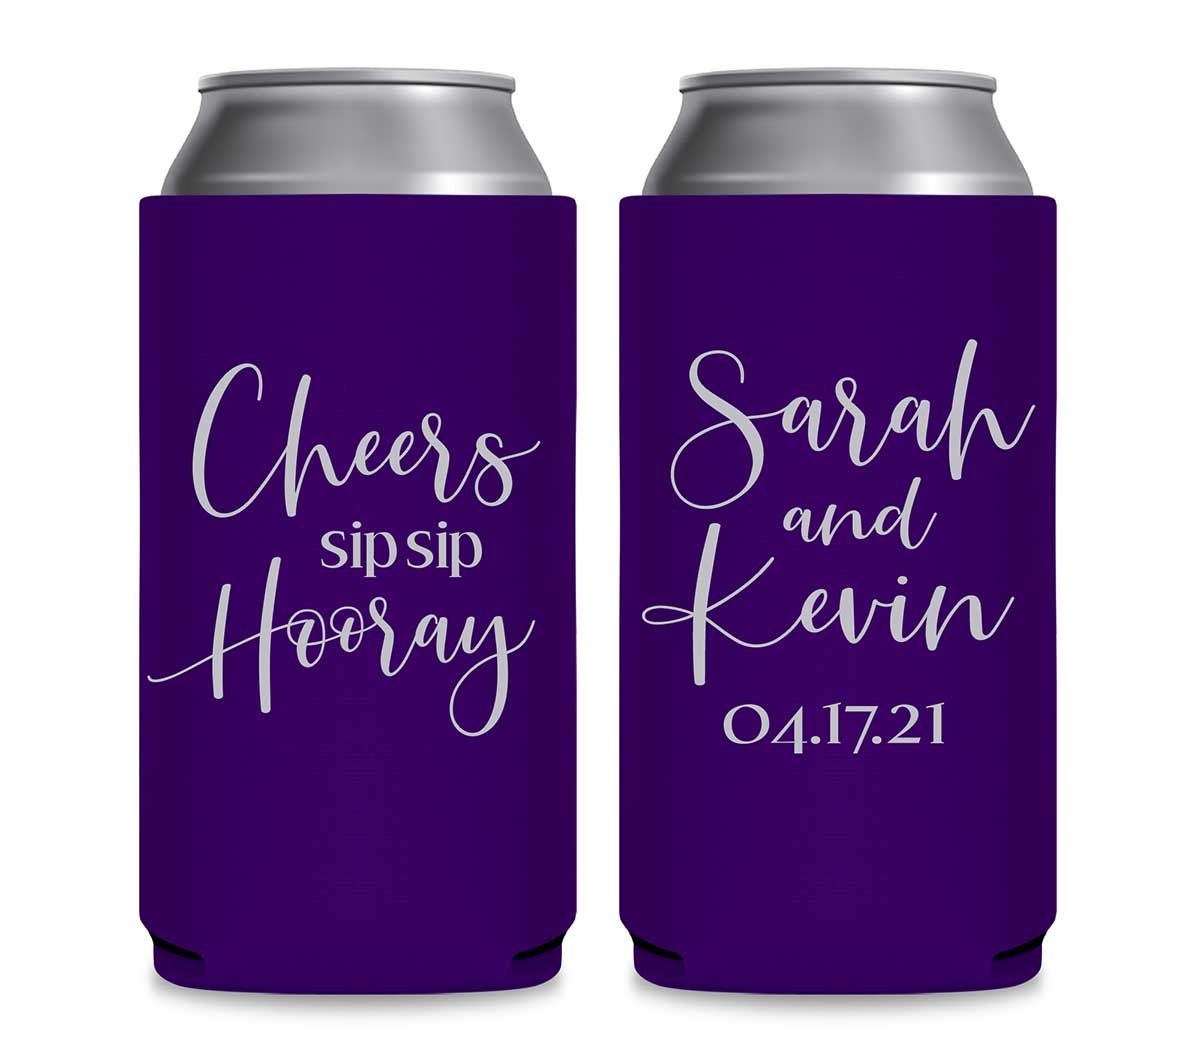 Sip Sip Hooray 2A Foldable 12 oz Slim Can Koozies Wedding Gifts for Guests